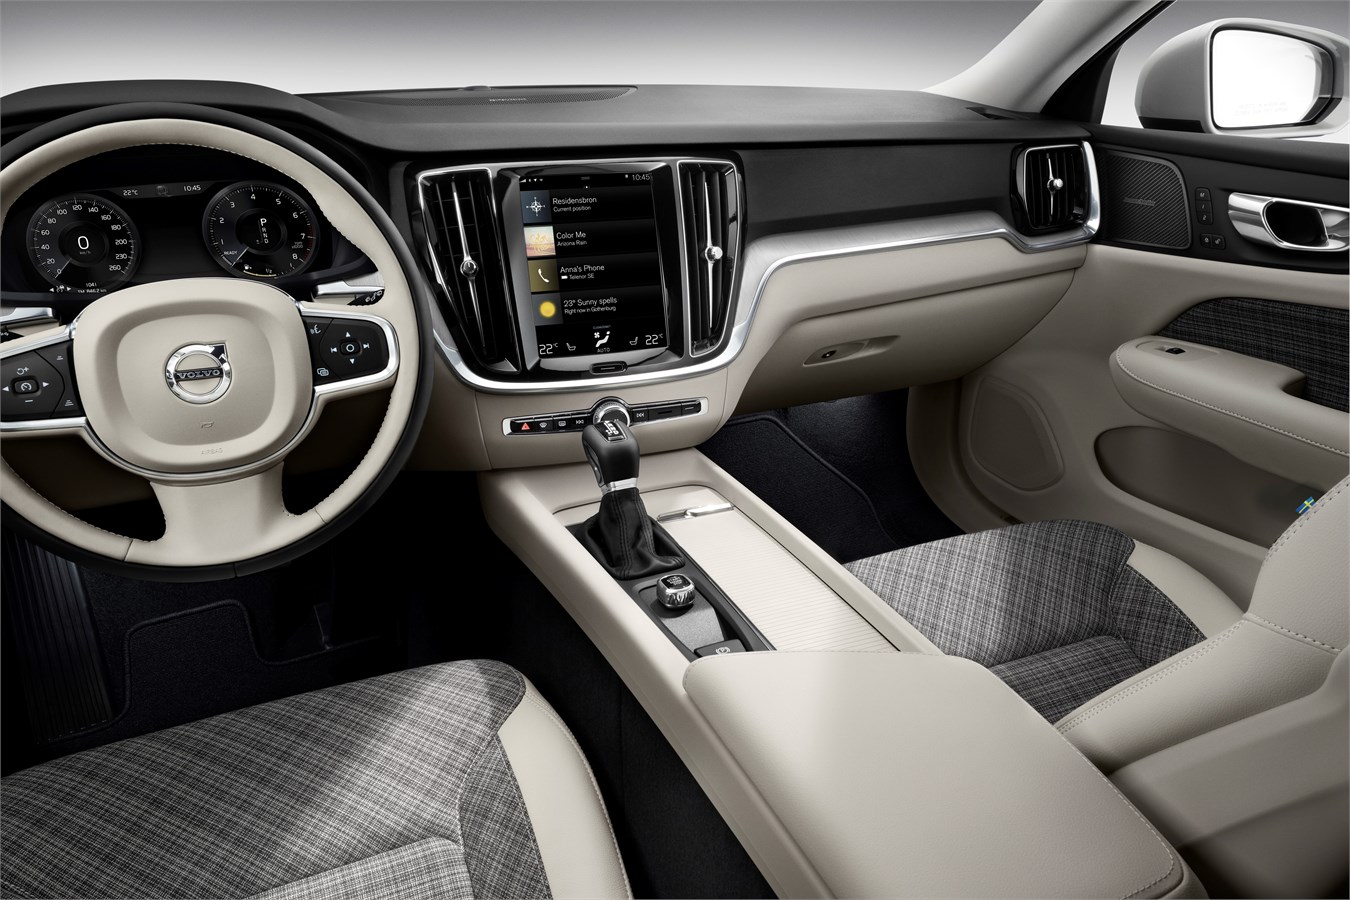 Volvo earns a spot on 2019 Wards 10 Best Interiors list for all-new V60 -  Volvo Car USA Newsroom